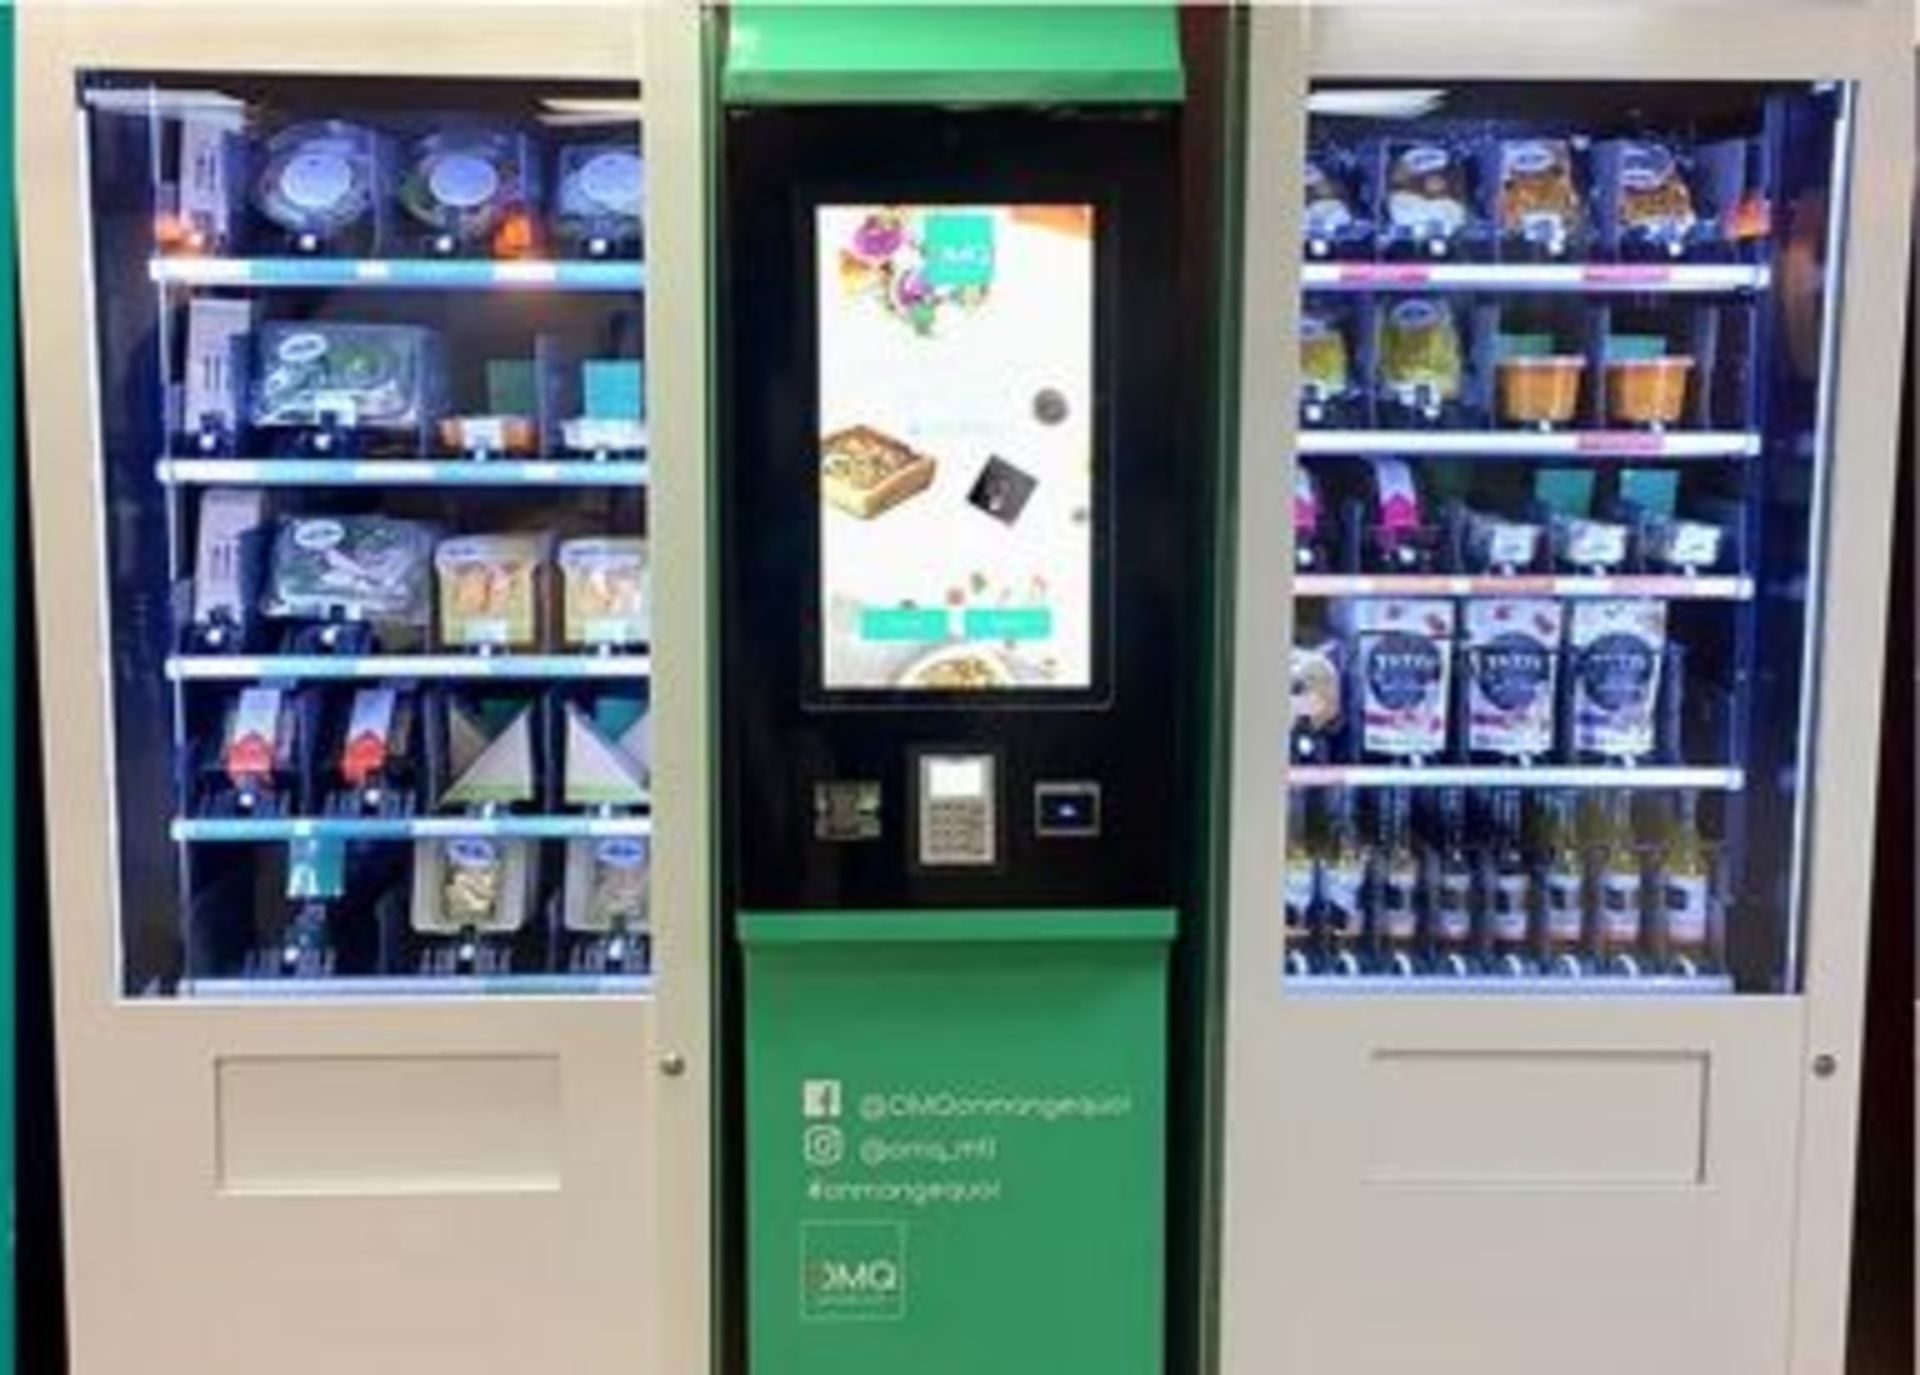 SIGNIFI Control & Companion Smart Vending System. Purchased NEW for $23,000 USD